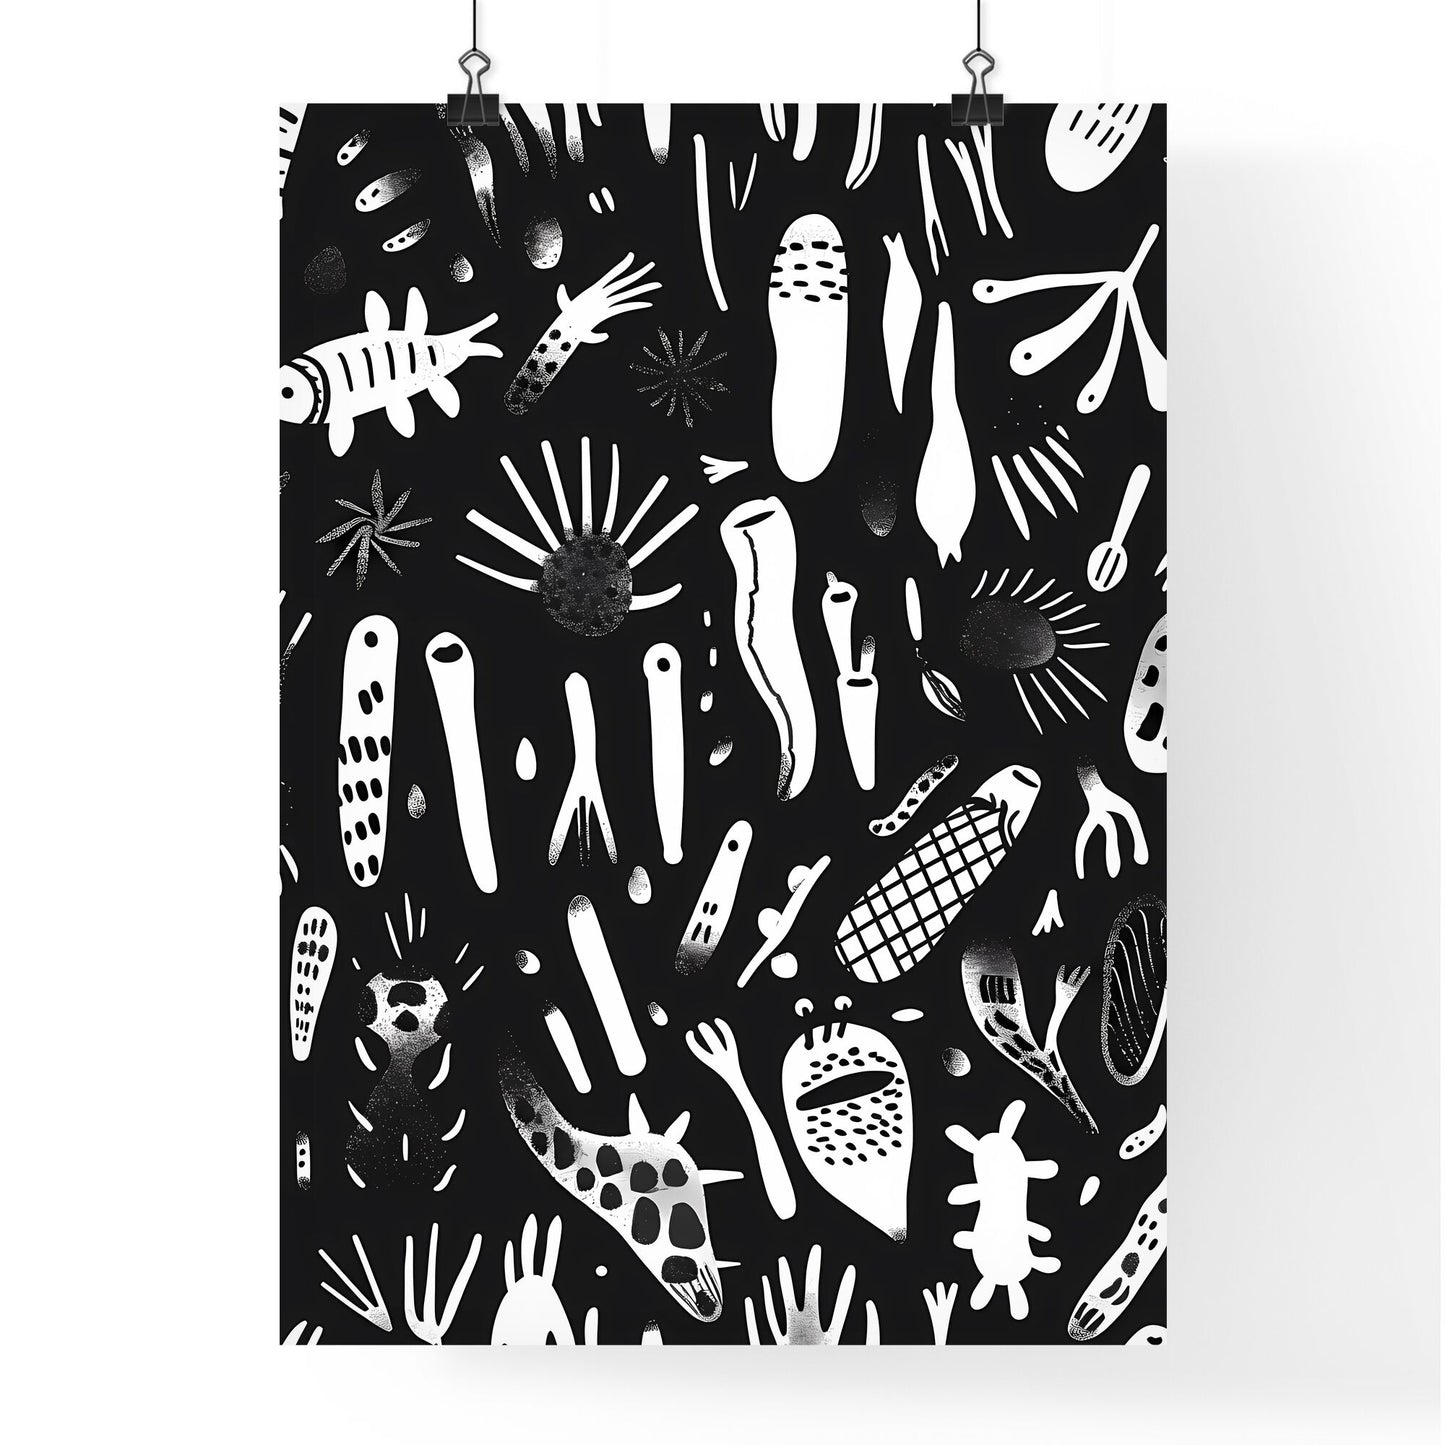 Black and white animal doodle pattern - abstract art creative design with hand drawn animals Default Title